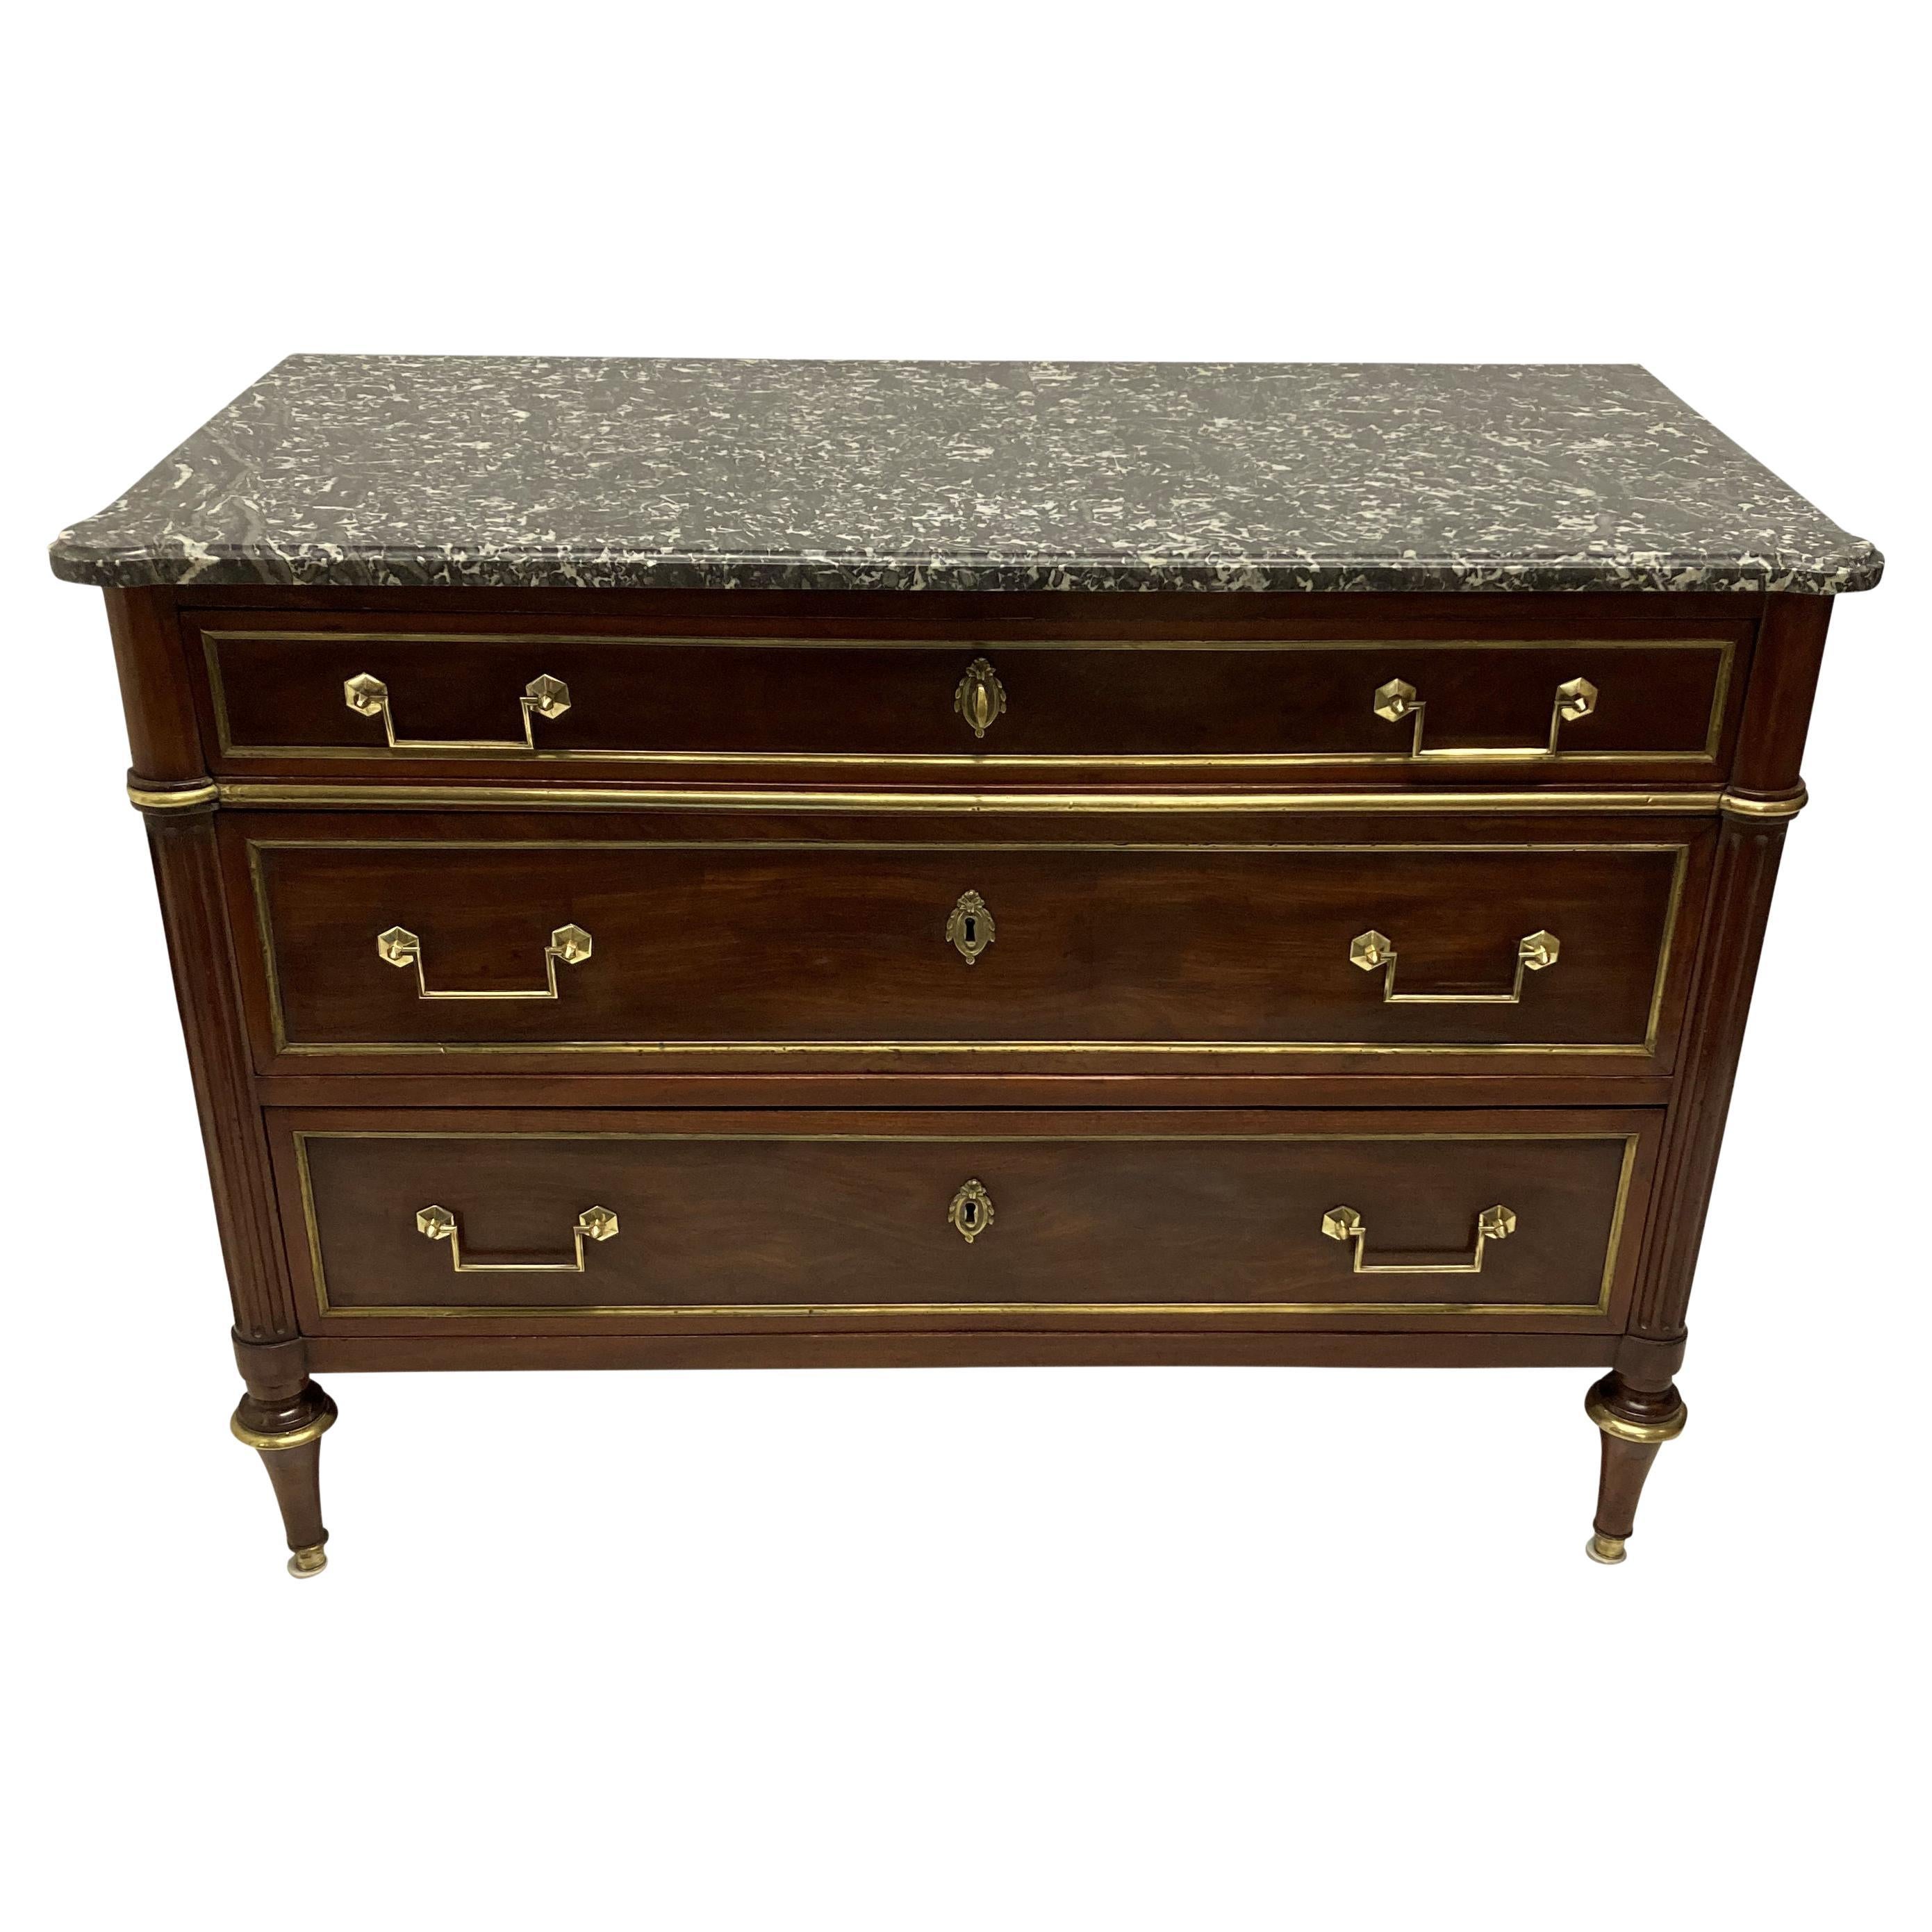 A French mahogany, three drawer Directoire commode, with brass mounts and inlay and a shaped variegated pale grey marble top.